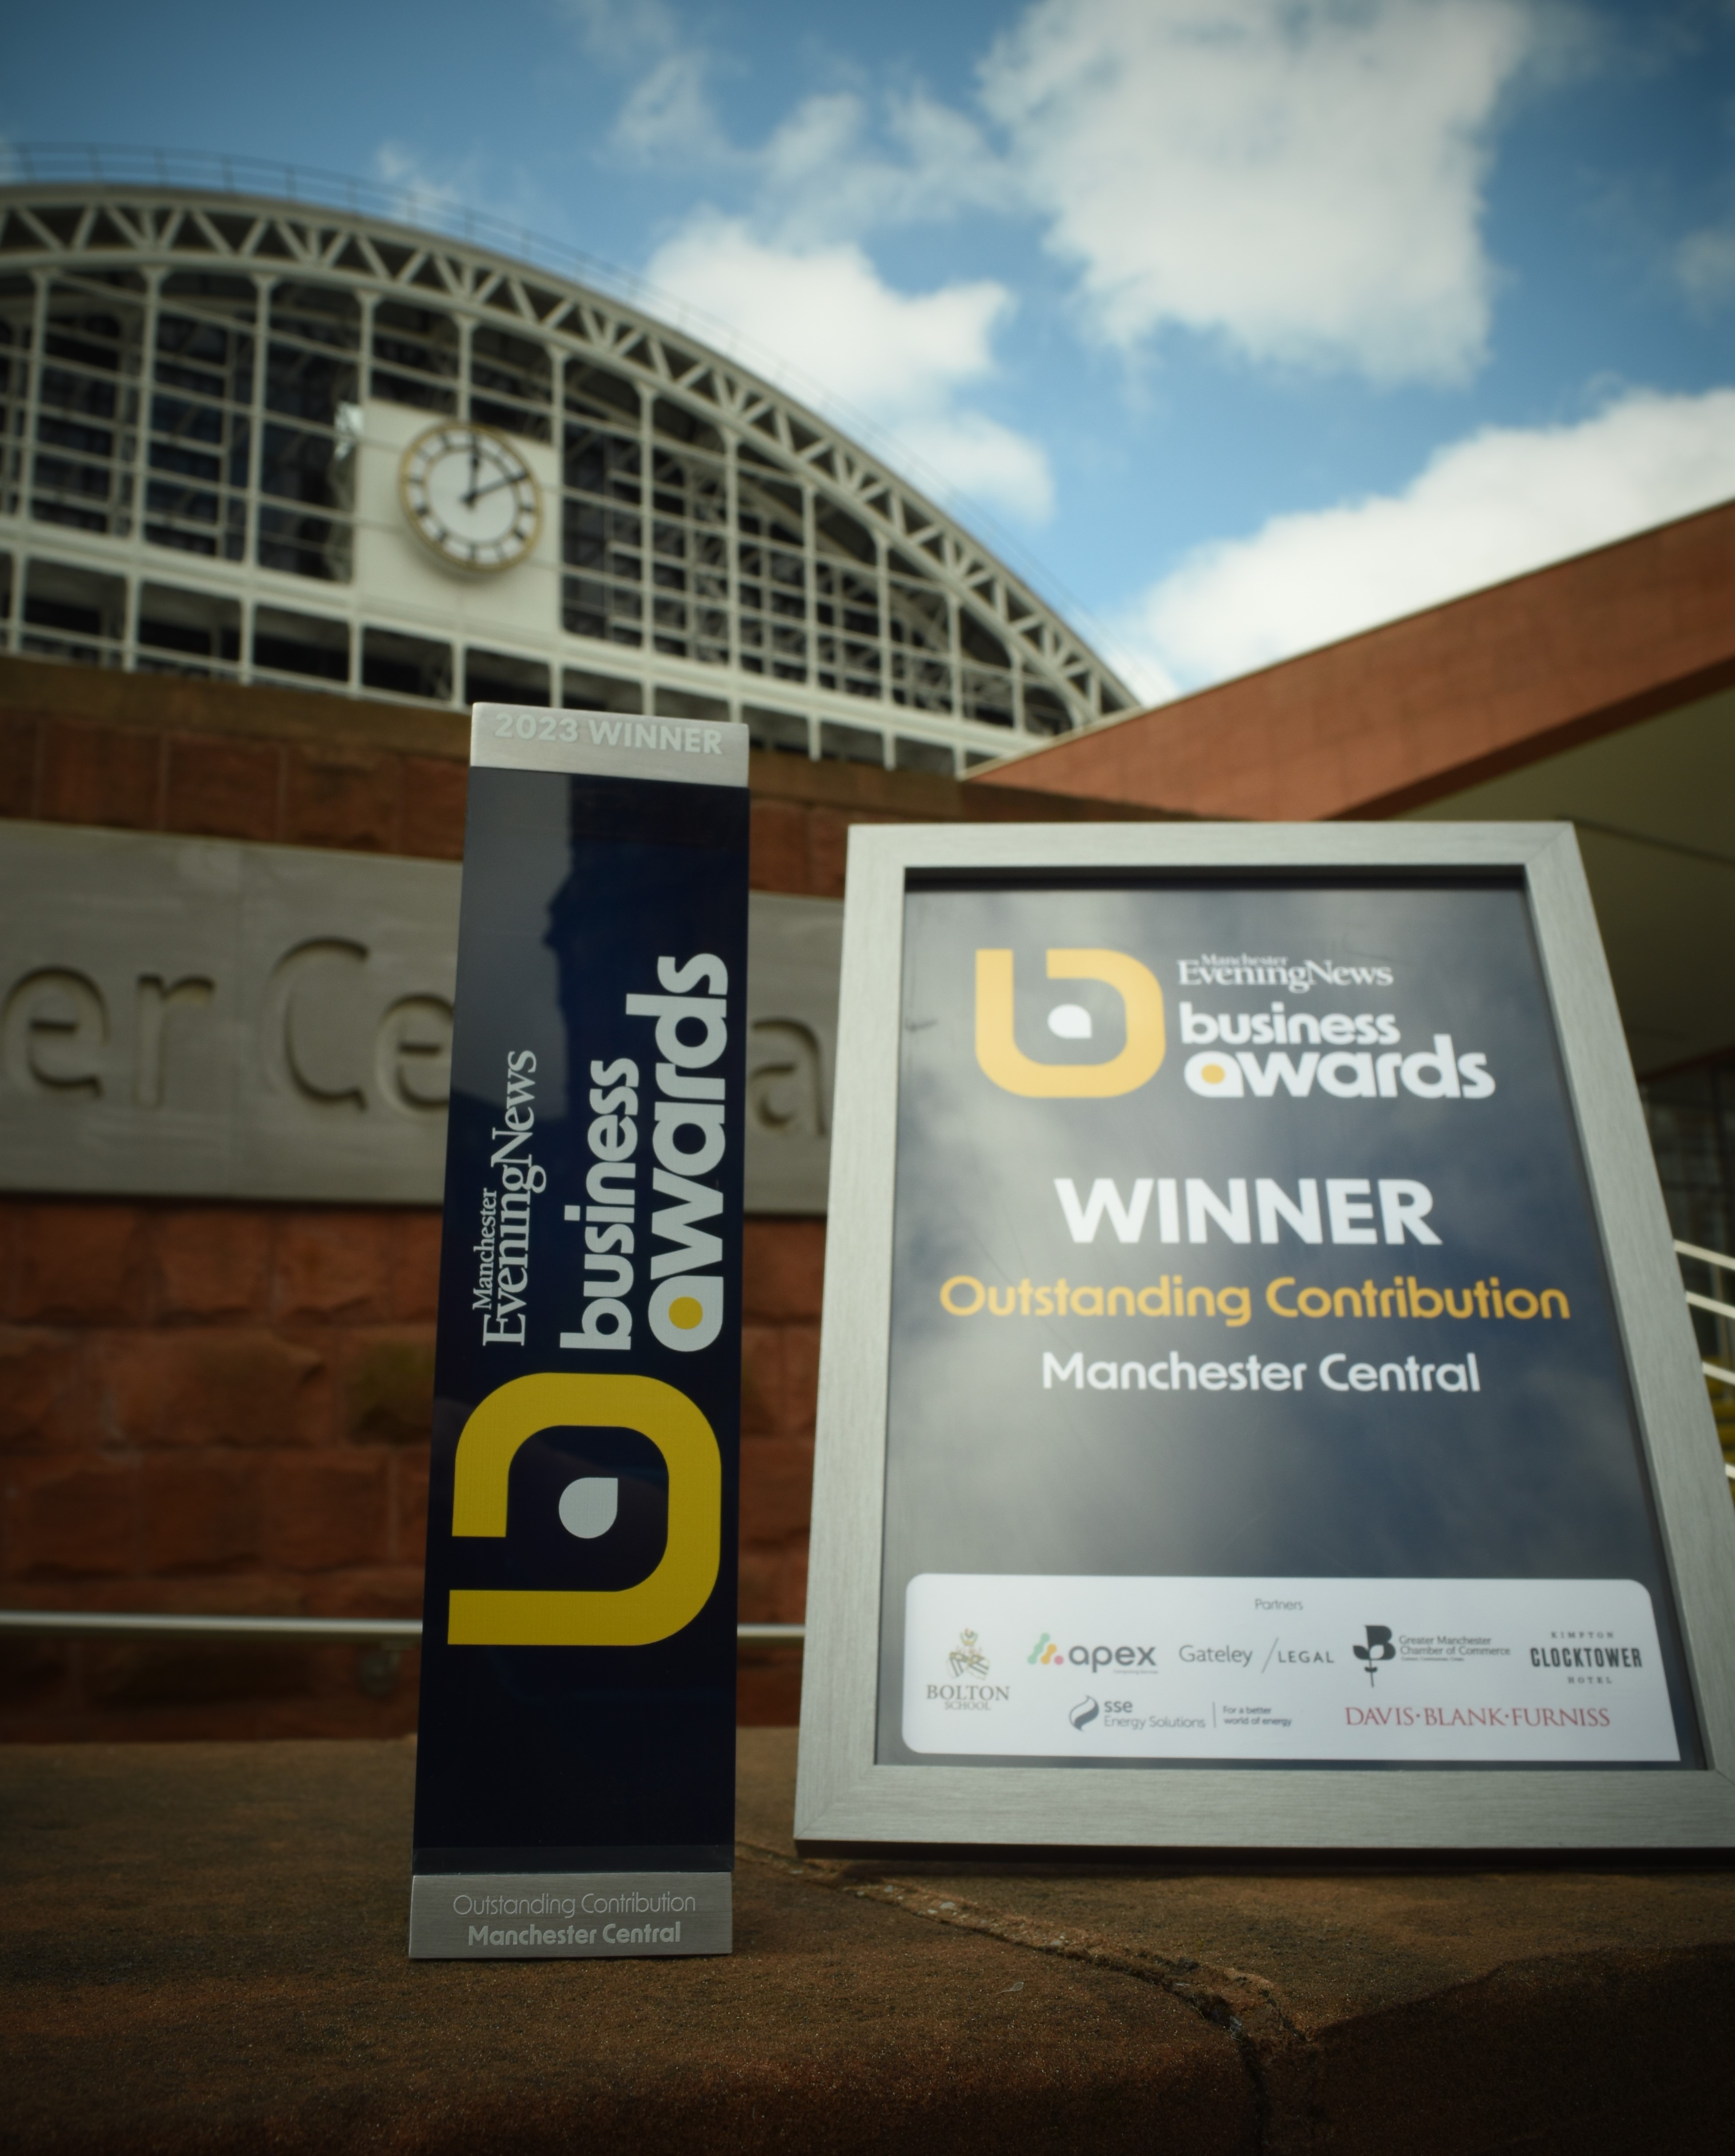 MEN Business Awards certificate and award sat in front of the exterior Manchester Central